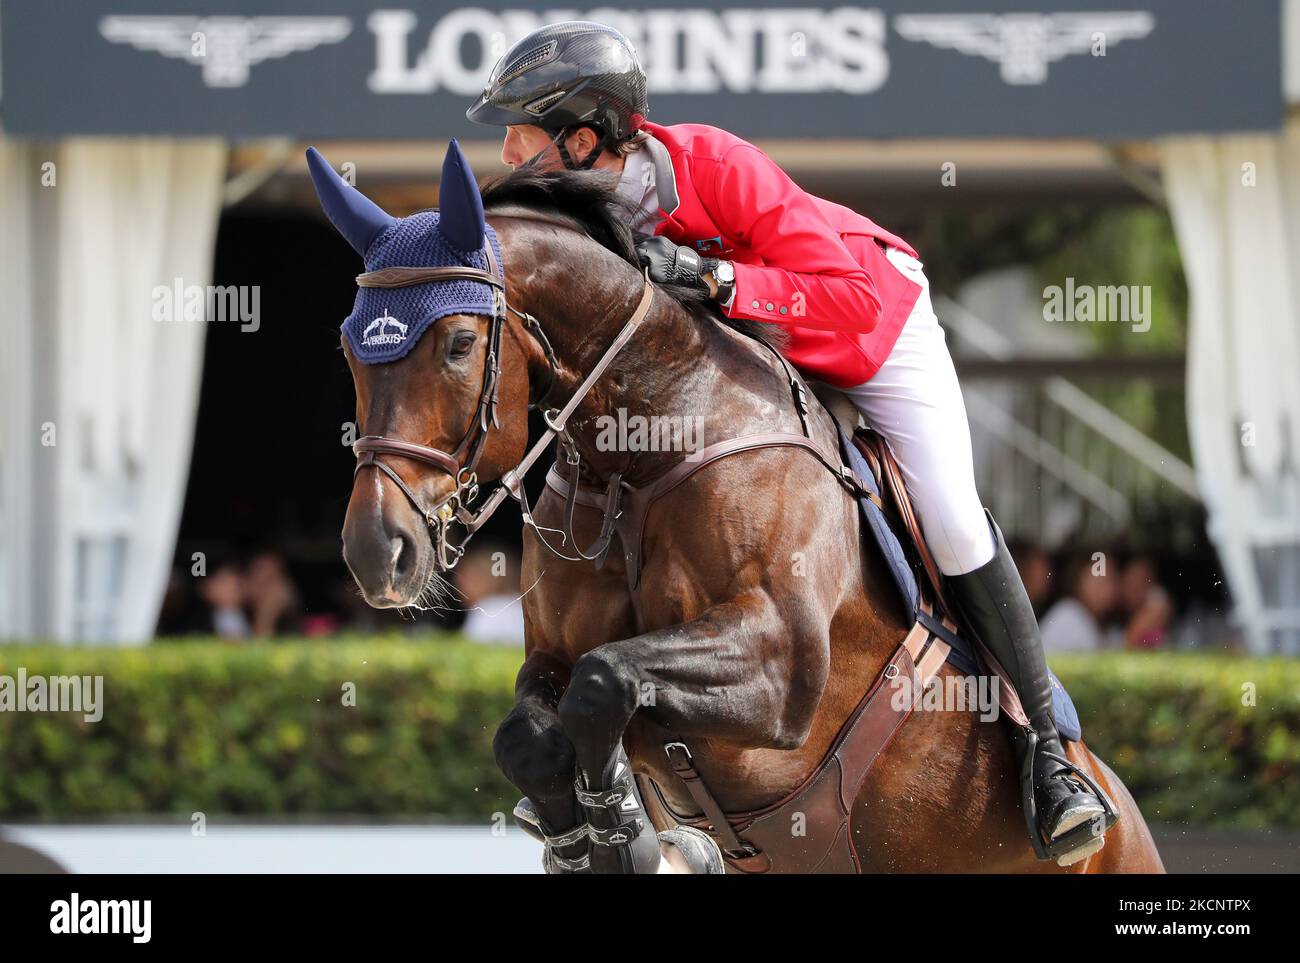 Martin Fuchs riding The Sinner during the Copa Negrita, corresponding to the 109th edition of the Longines FEI Jumping Nations Cup Jumping Final, held at the Polo Club on 01st October 2021, in Barcelona, Spain. (Photo by Joan Valls/Urbanandsport/NurPhoto) Stock Photo